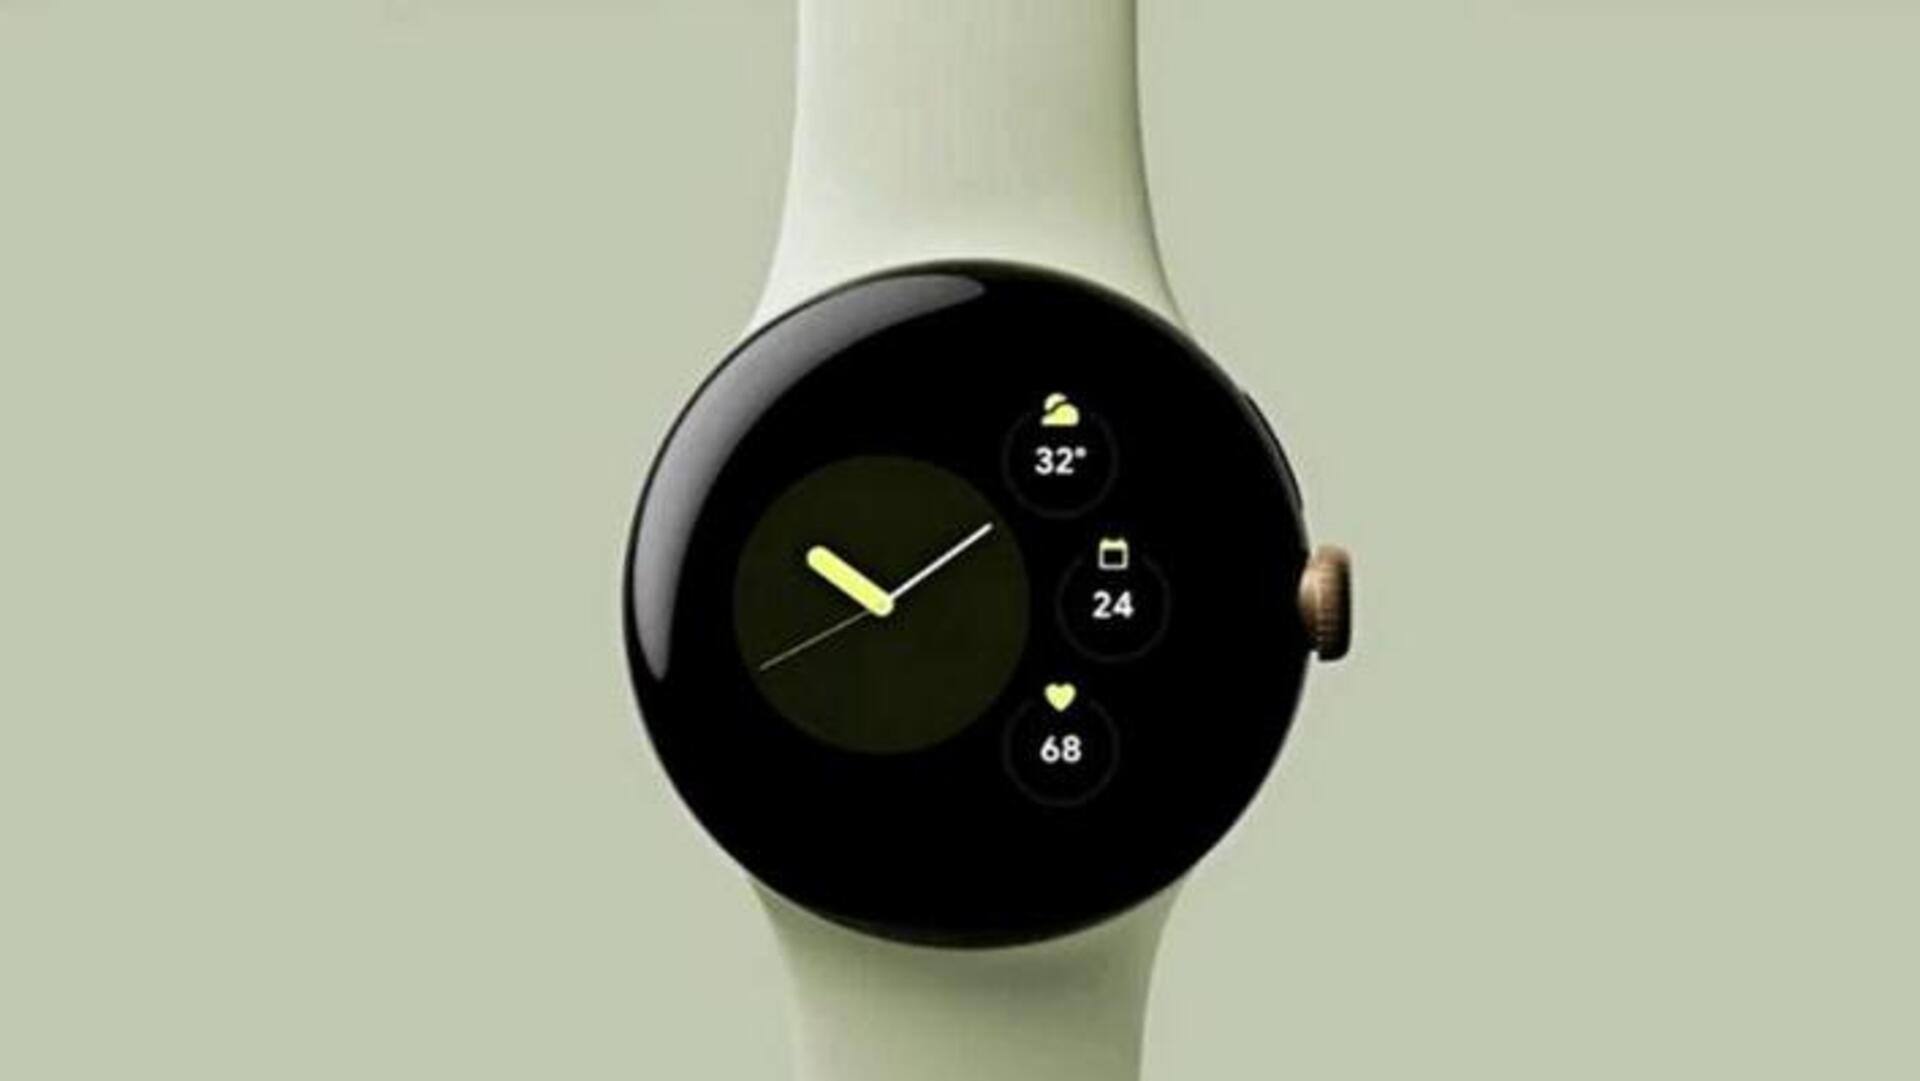 More complications are being added to At a Glance on Pixel Watch